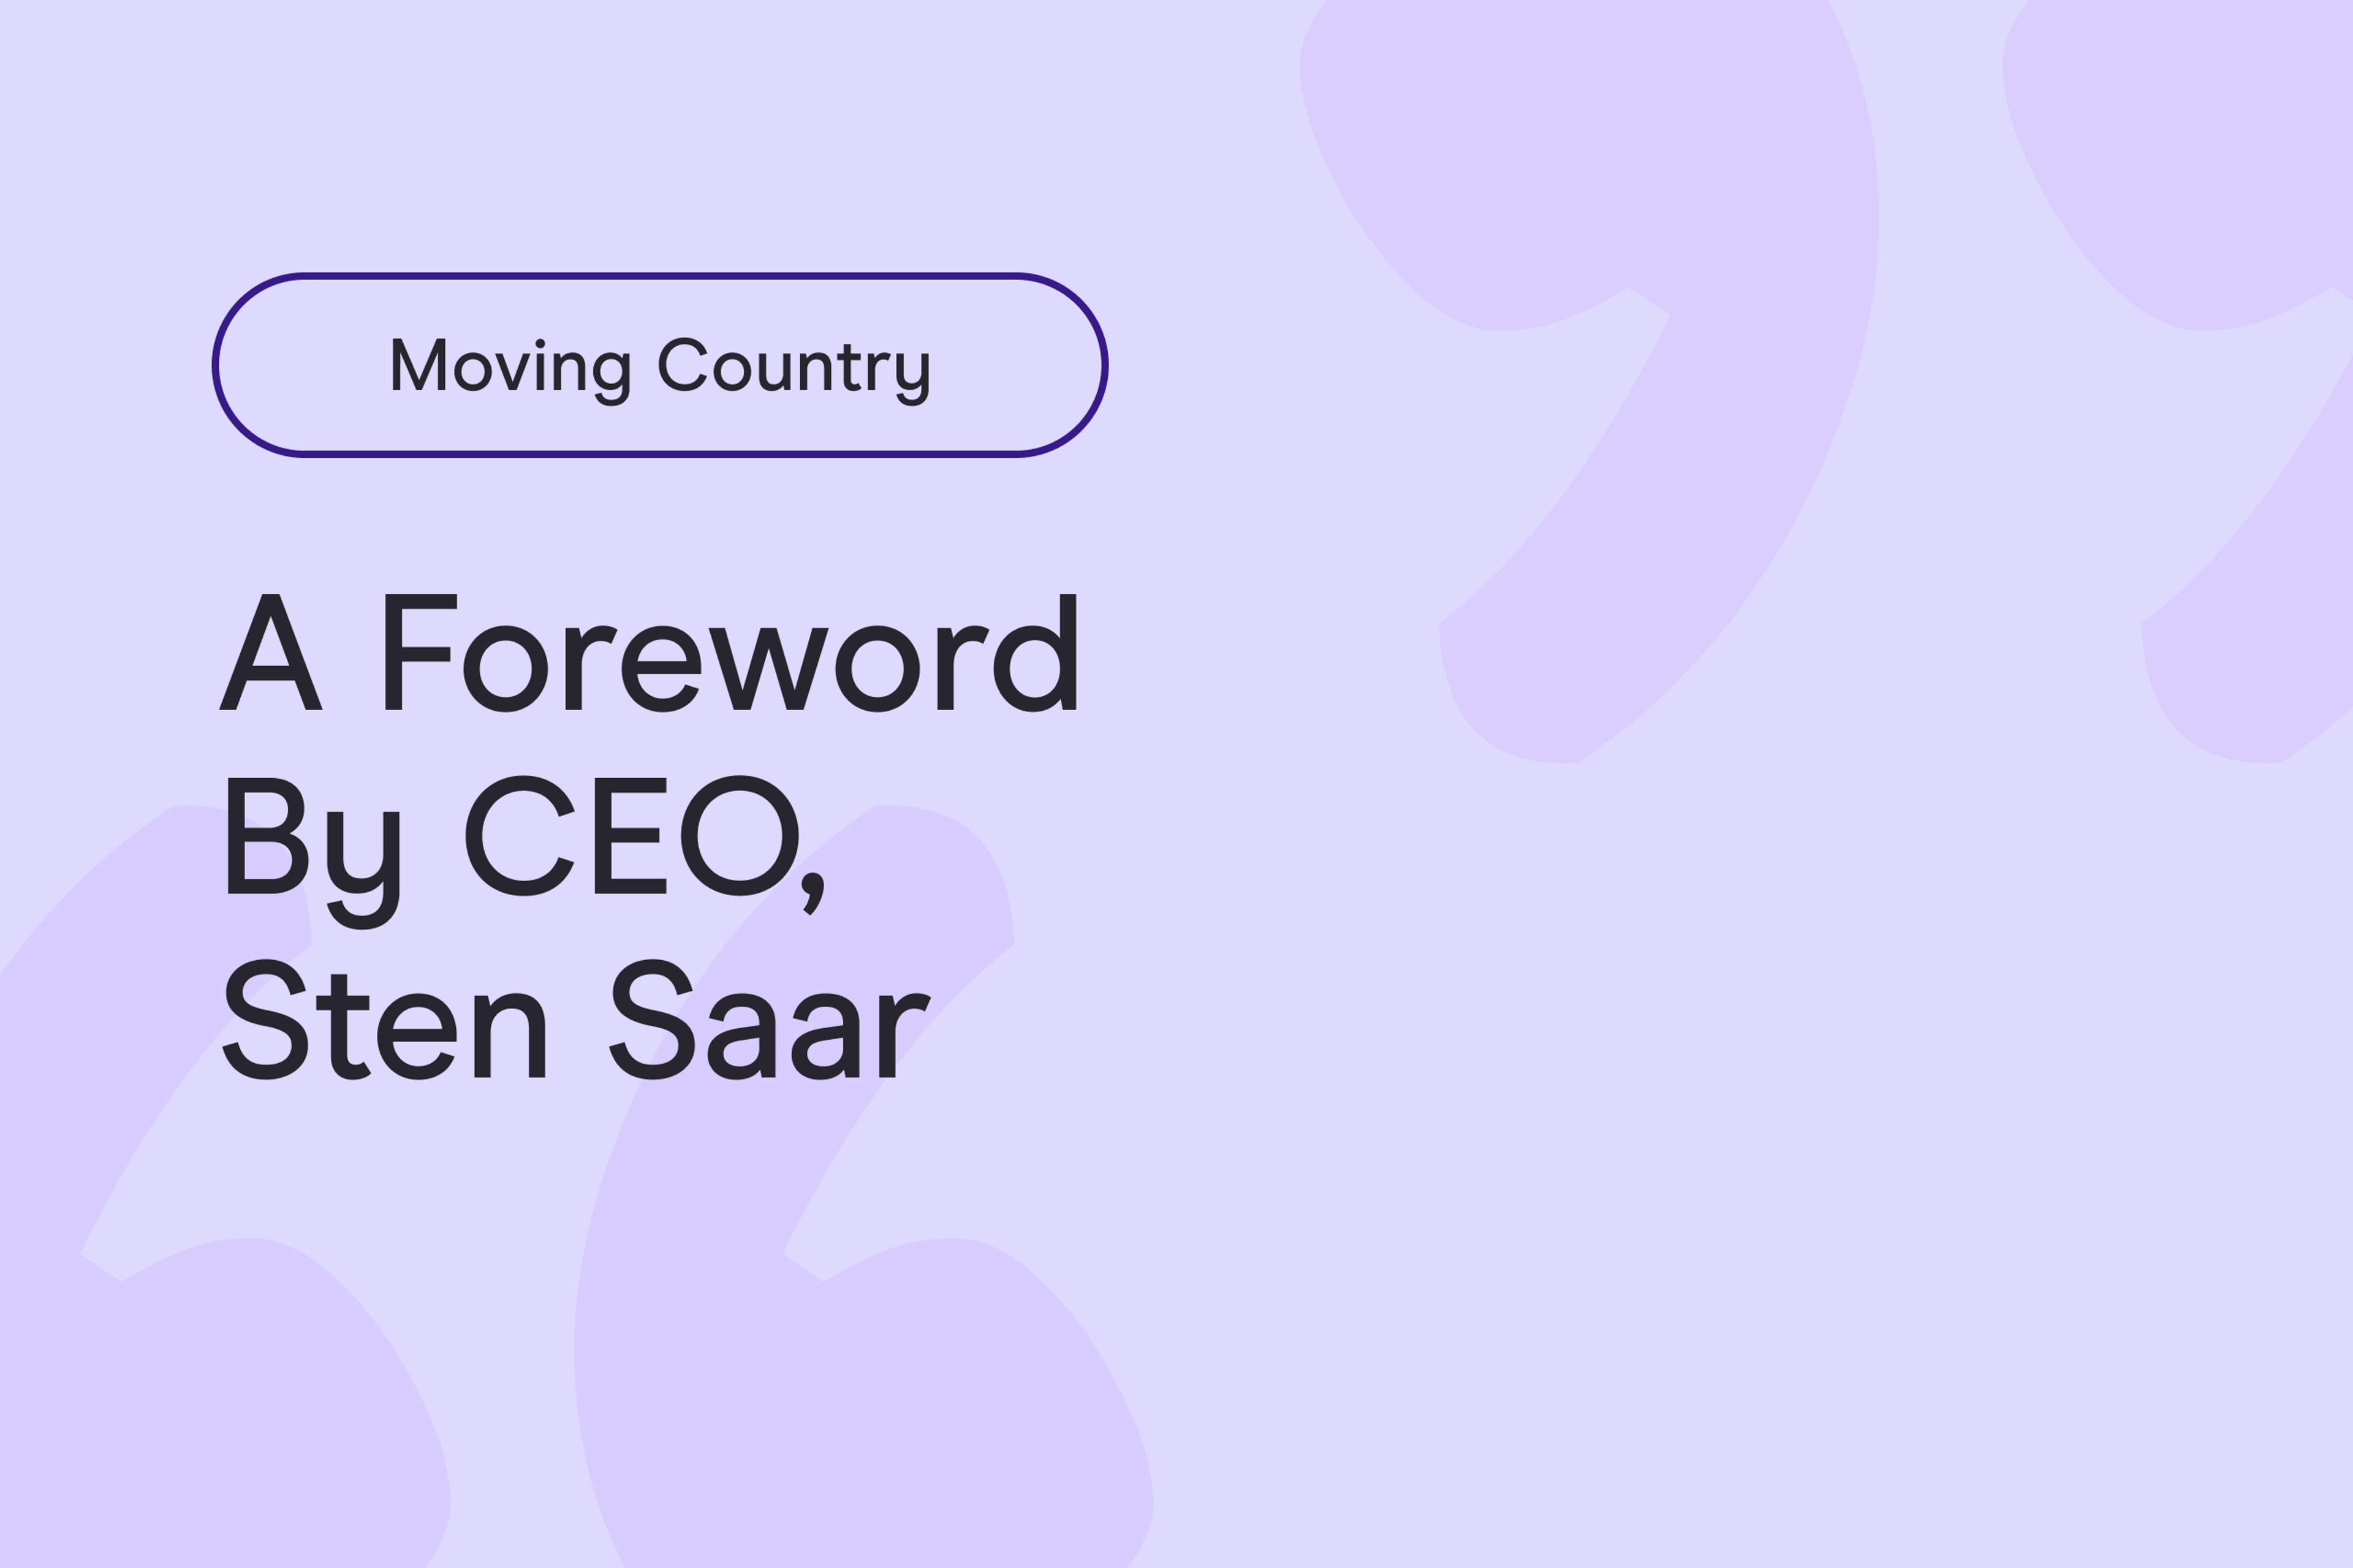 Moving Country: a foreword by our CEO, Sten Saar